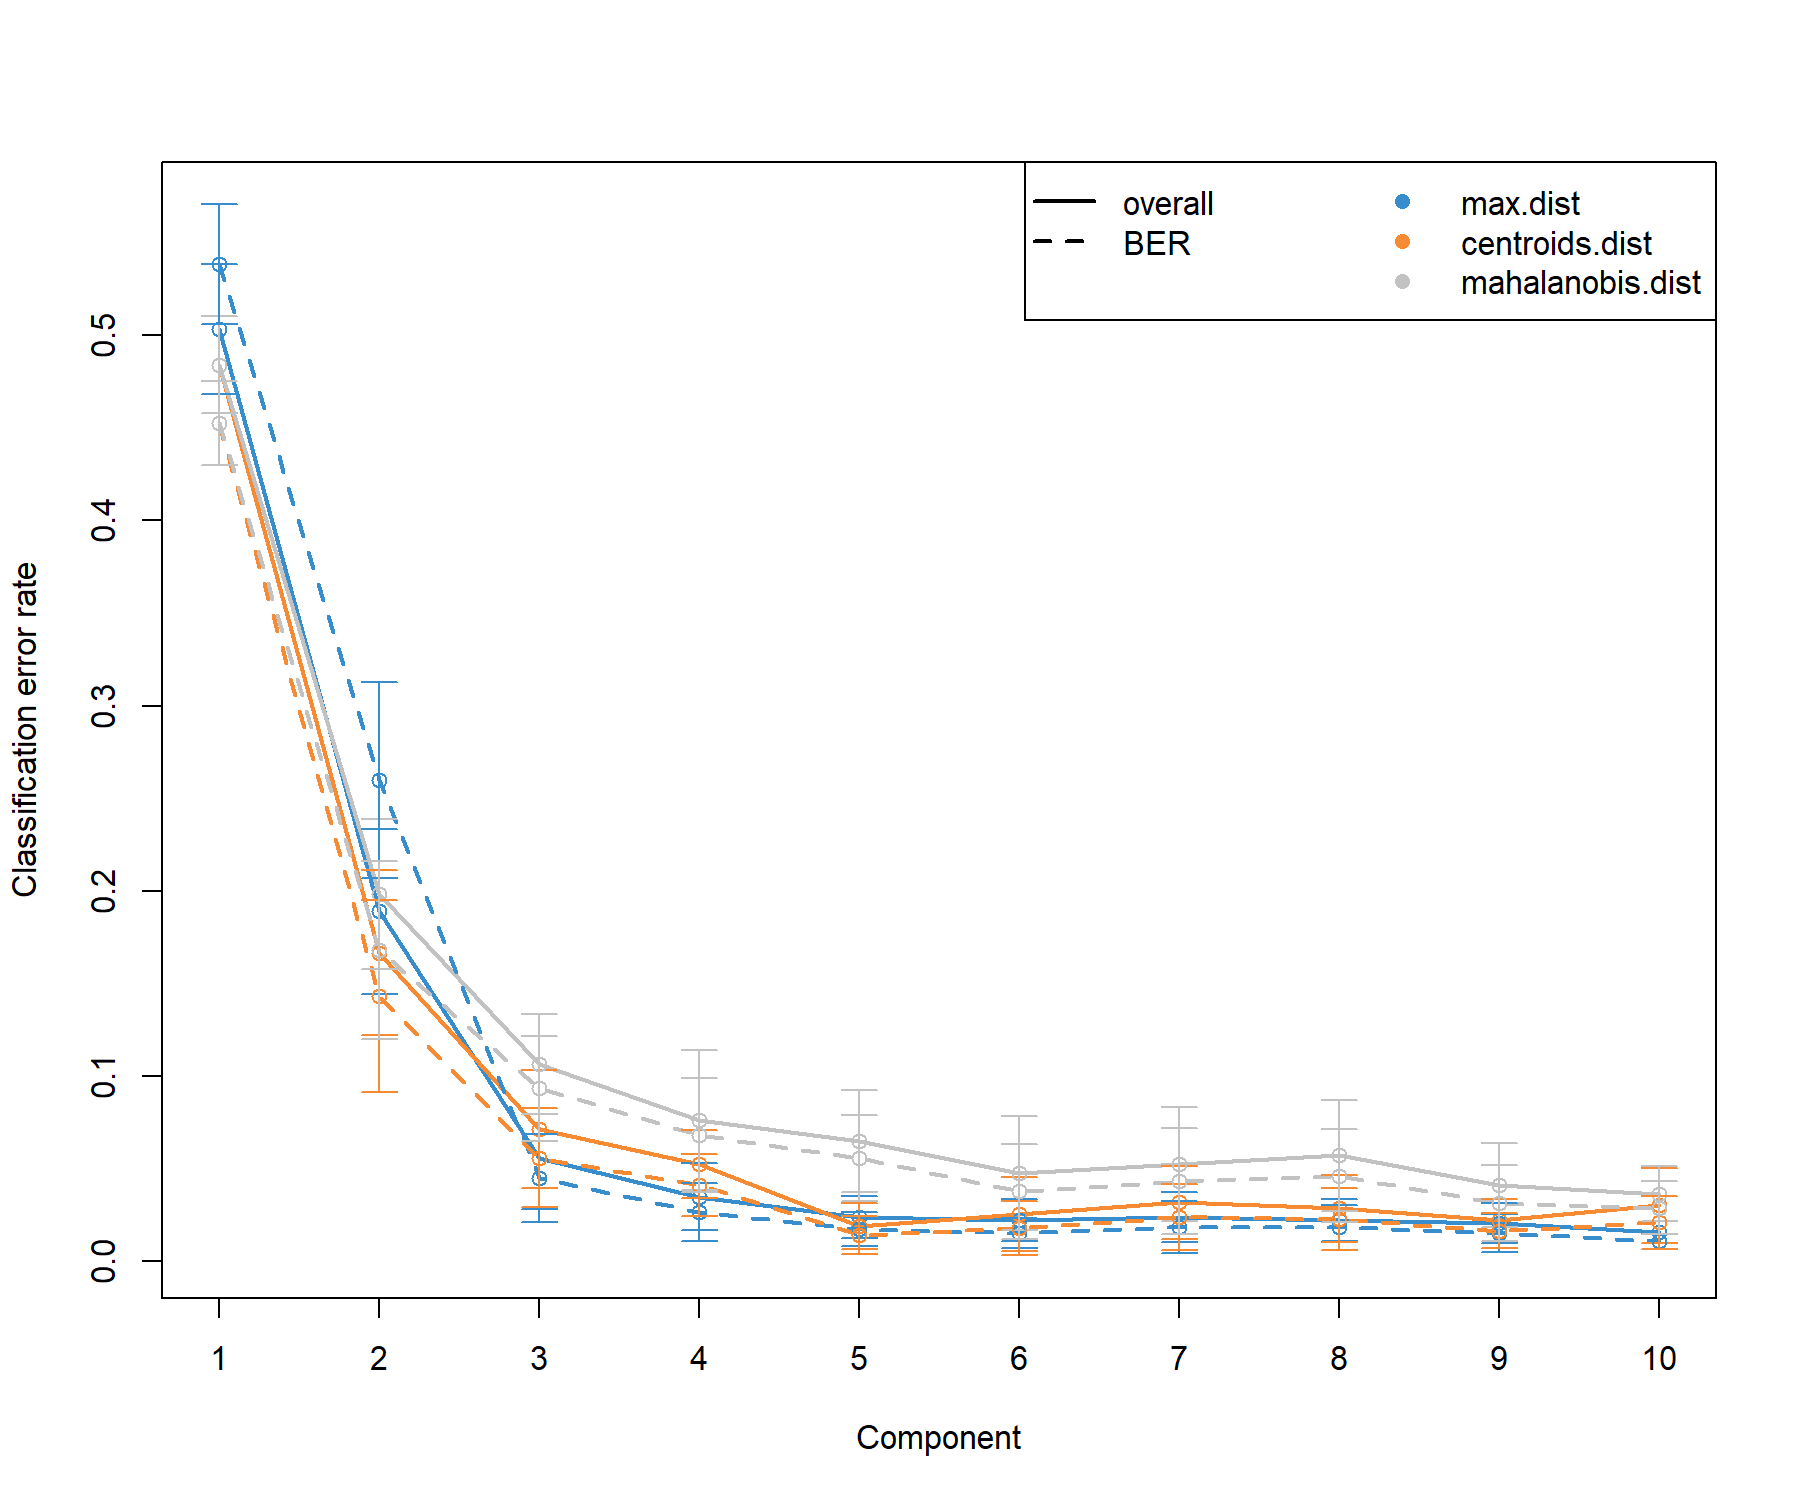 Tuning the number of components in PLS-DA on the SRBCT gene expression data. For each component, repeated cross-validation (10 \(\times 3-\)fold CV) is used to evaluate the PLS-DA classification performance (overall and balanced error rate BER), for each type of prediction distance; max.dist, centroids.dist and mahalanobis.dist. Bars show the standard deviation across the repeated folds. The plot shows that the error rate reaches a minimum from 3 components.